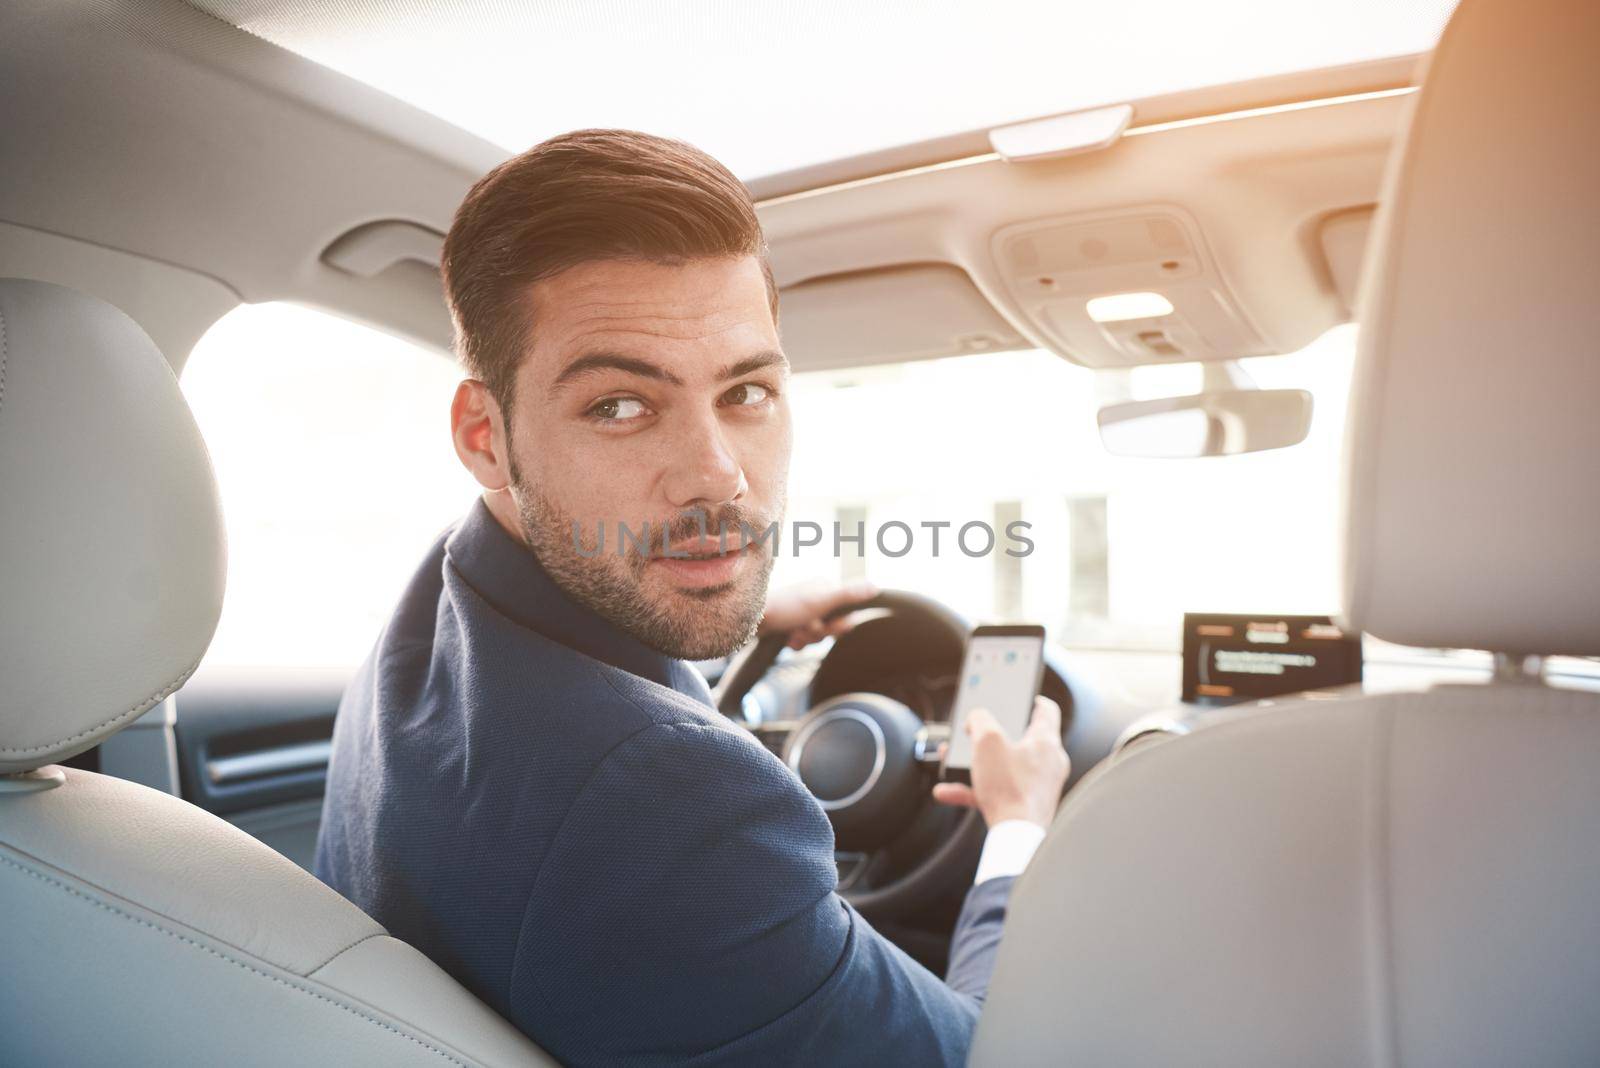 Portrait of a stylish confident businessman in a car wearing suit. Turning to the rear seats with a serious expression and phone in hand, park the car.